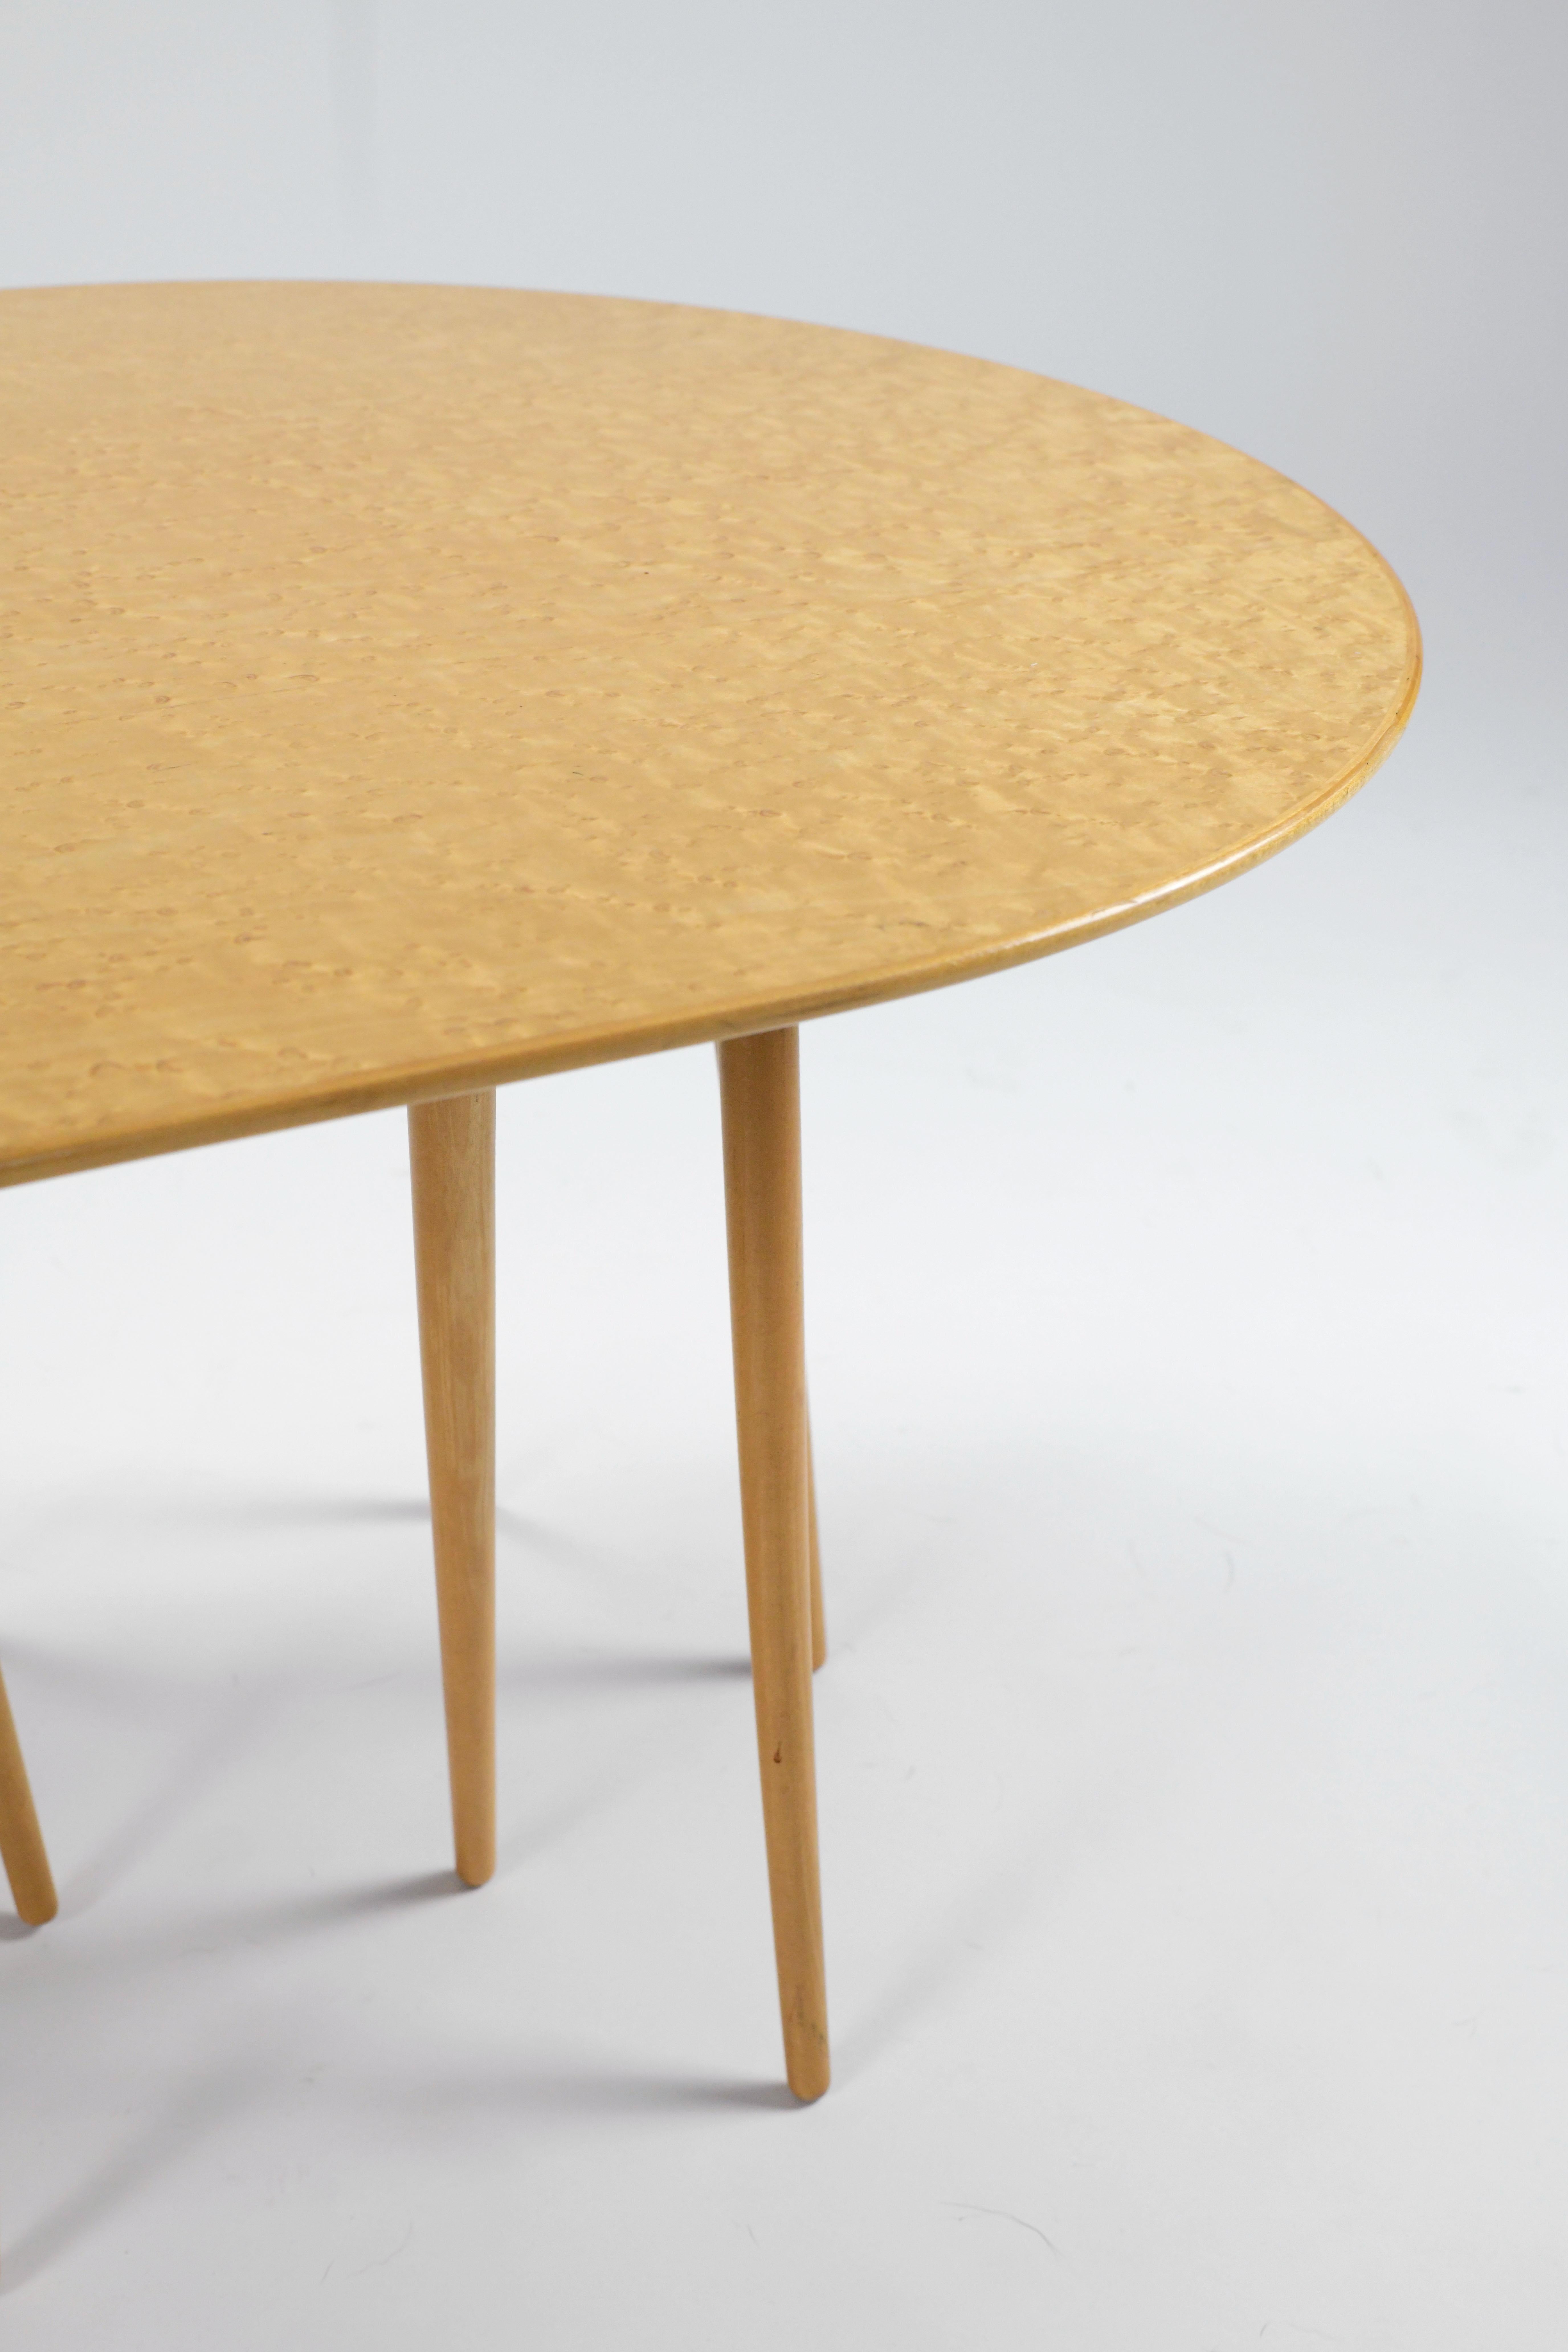 Toothpick Cactus Coffee Table by Lawrence Laske for Knoll  In Good Condition For Sale In Los Angeles, CA